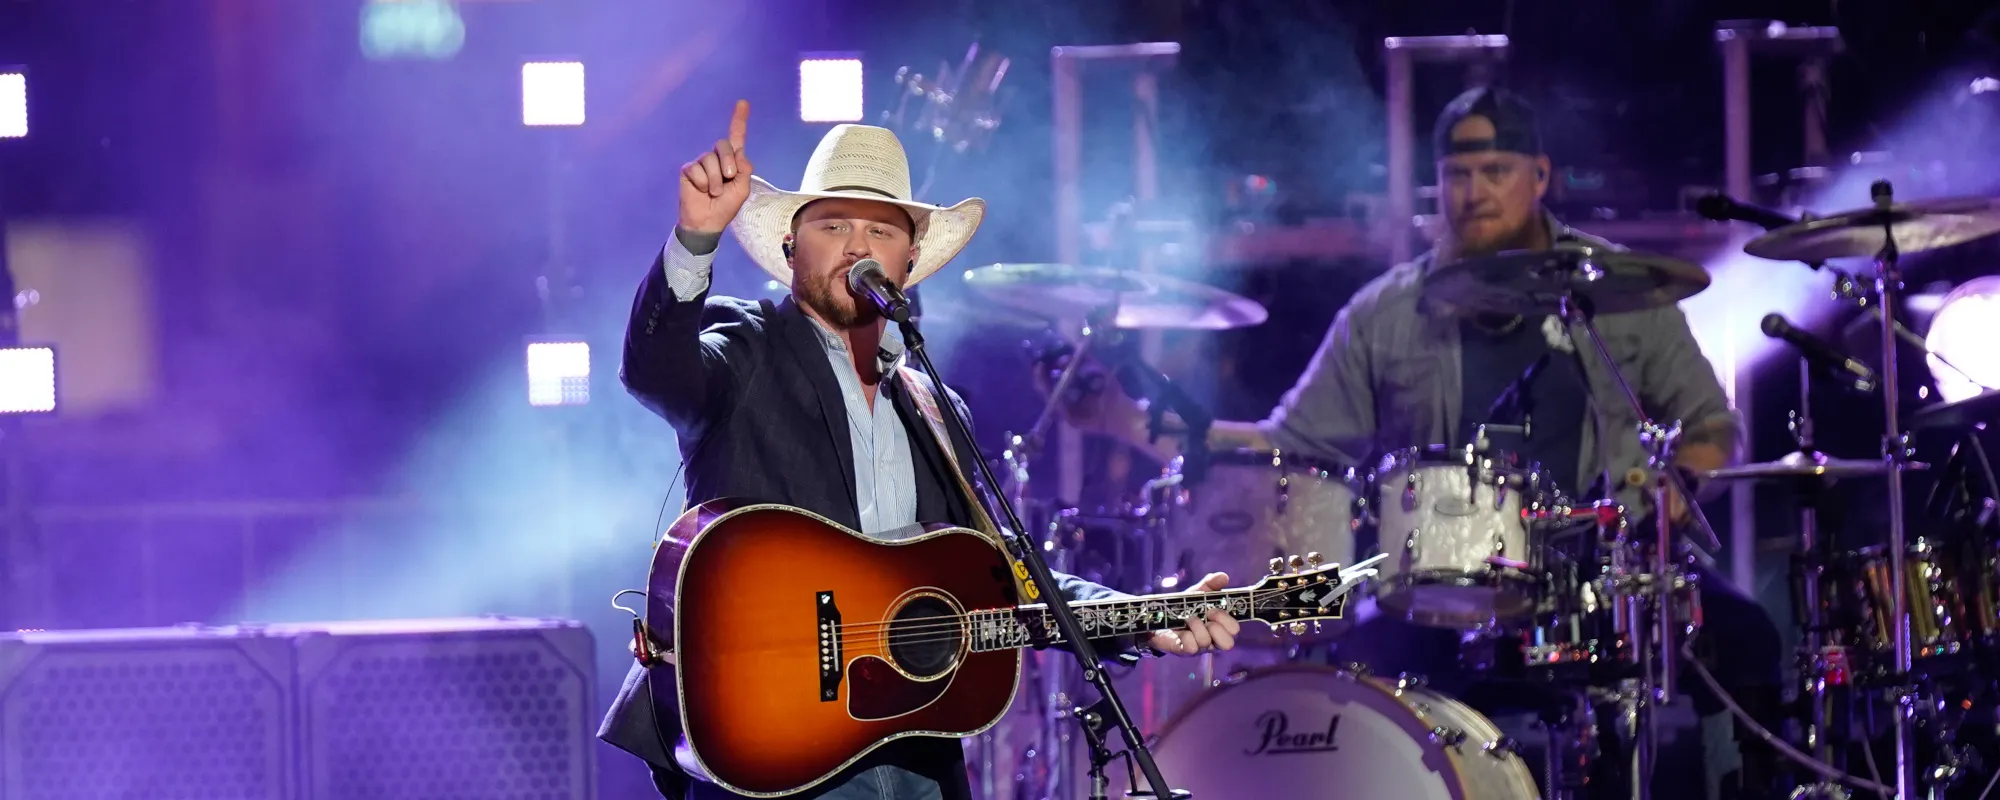 How to Watch ‘CMT Presents: A Cody Johnson Christmas’